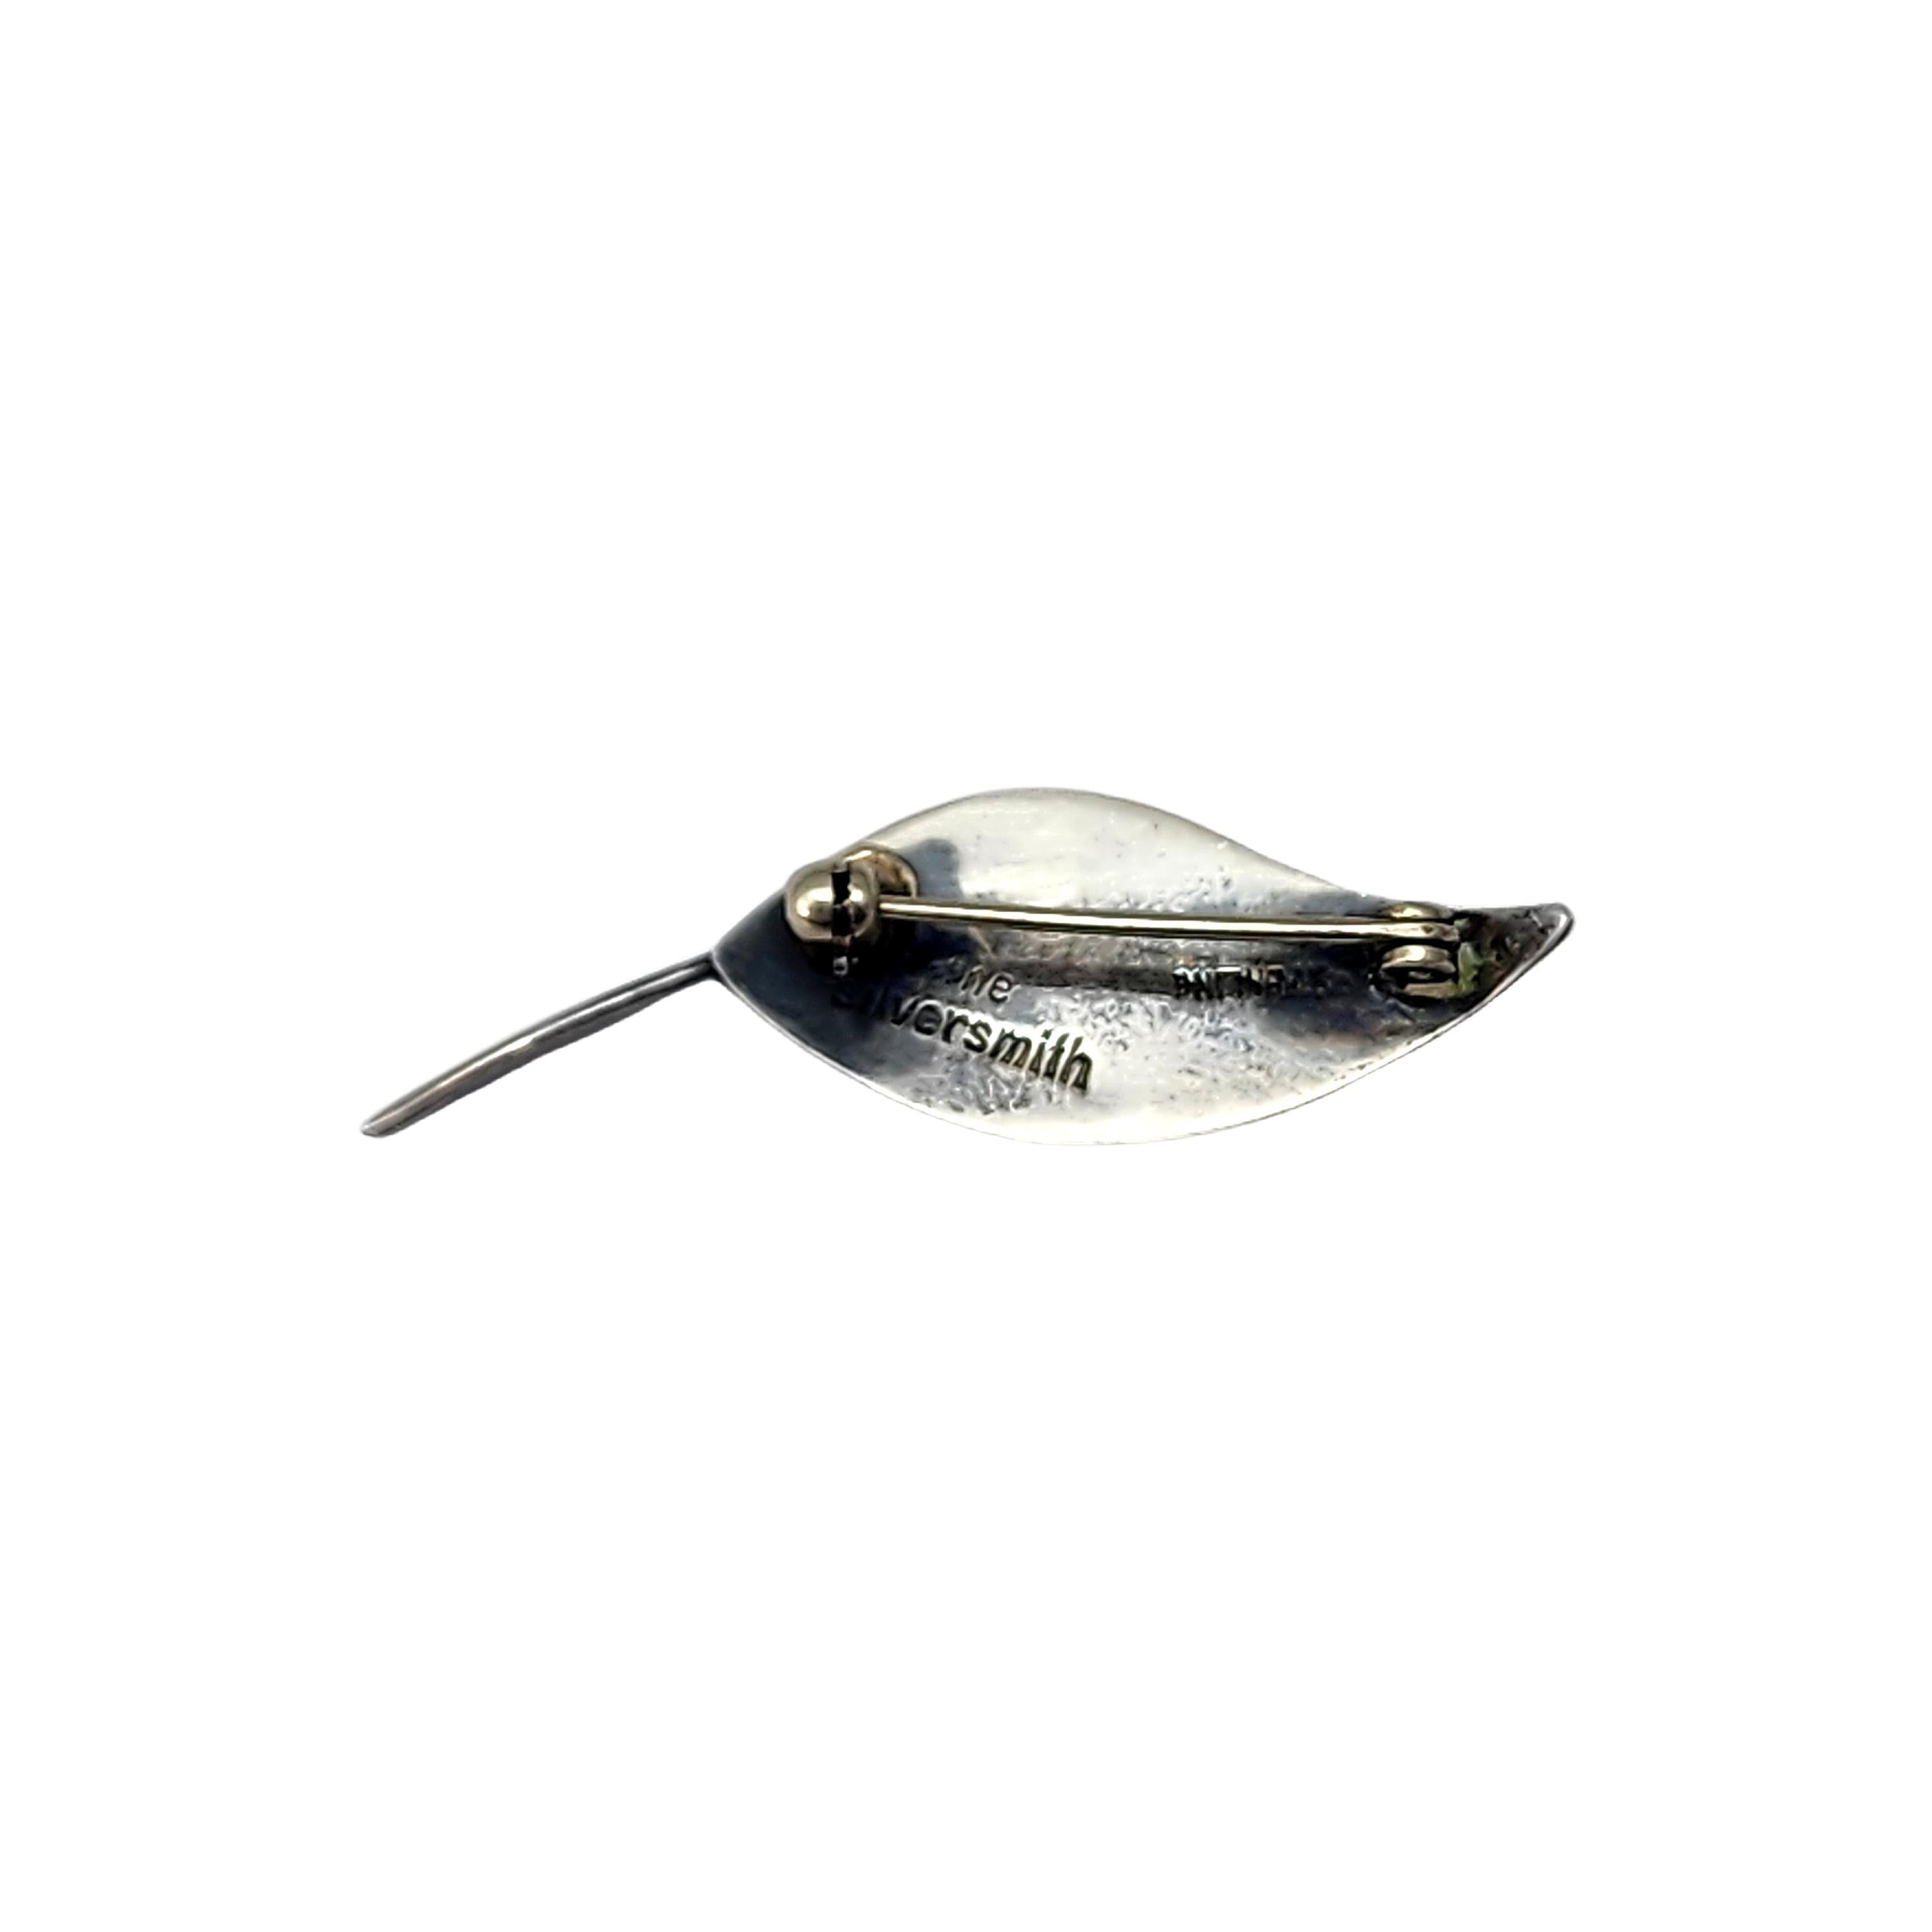 Vintage modernist sterling silver leaf pin/brooch by The Silversmith.

Ella L Cone was the proprietor of The Silversmith's Shop in Boston and Hyannis in the 1940s thru the 1960s. This small piece features modernist lines with an applied center